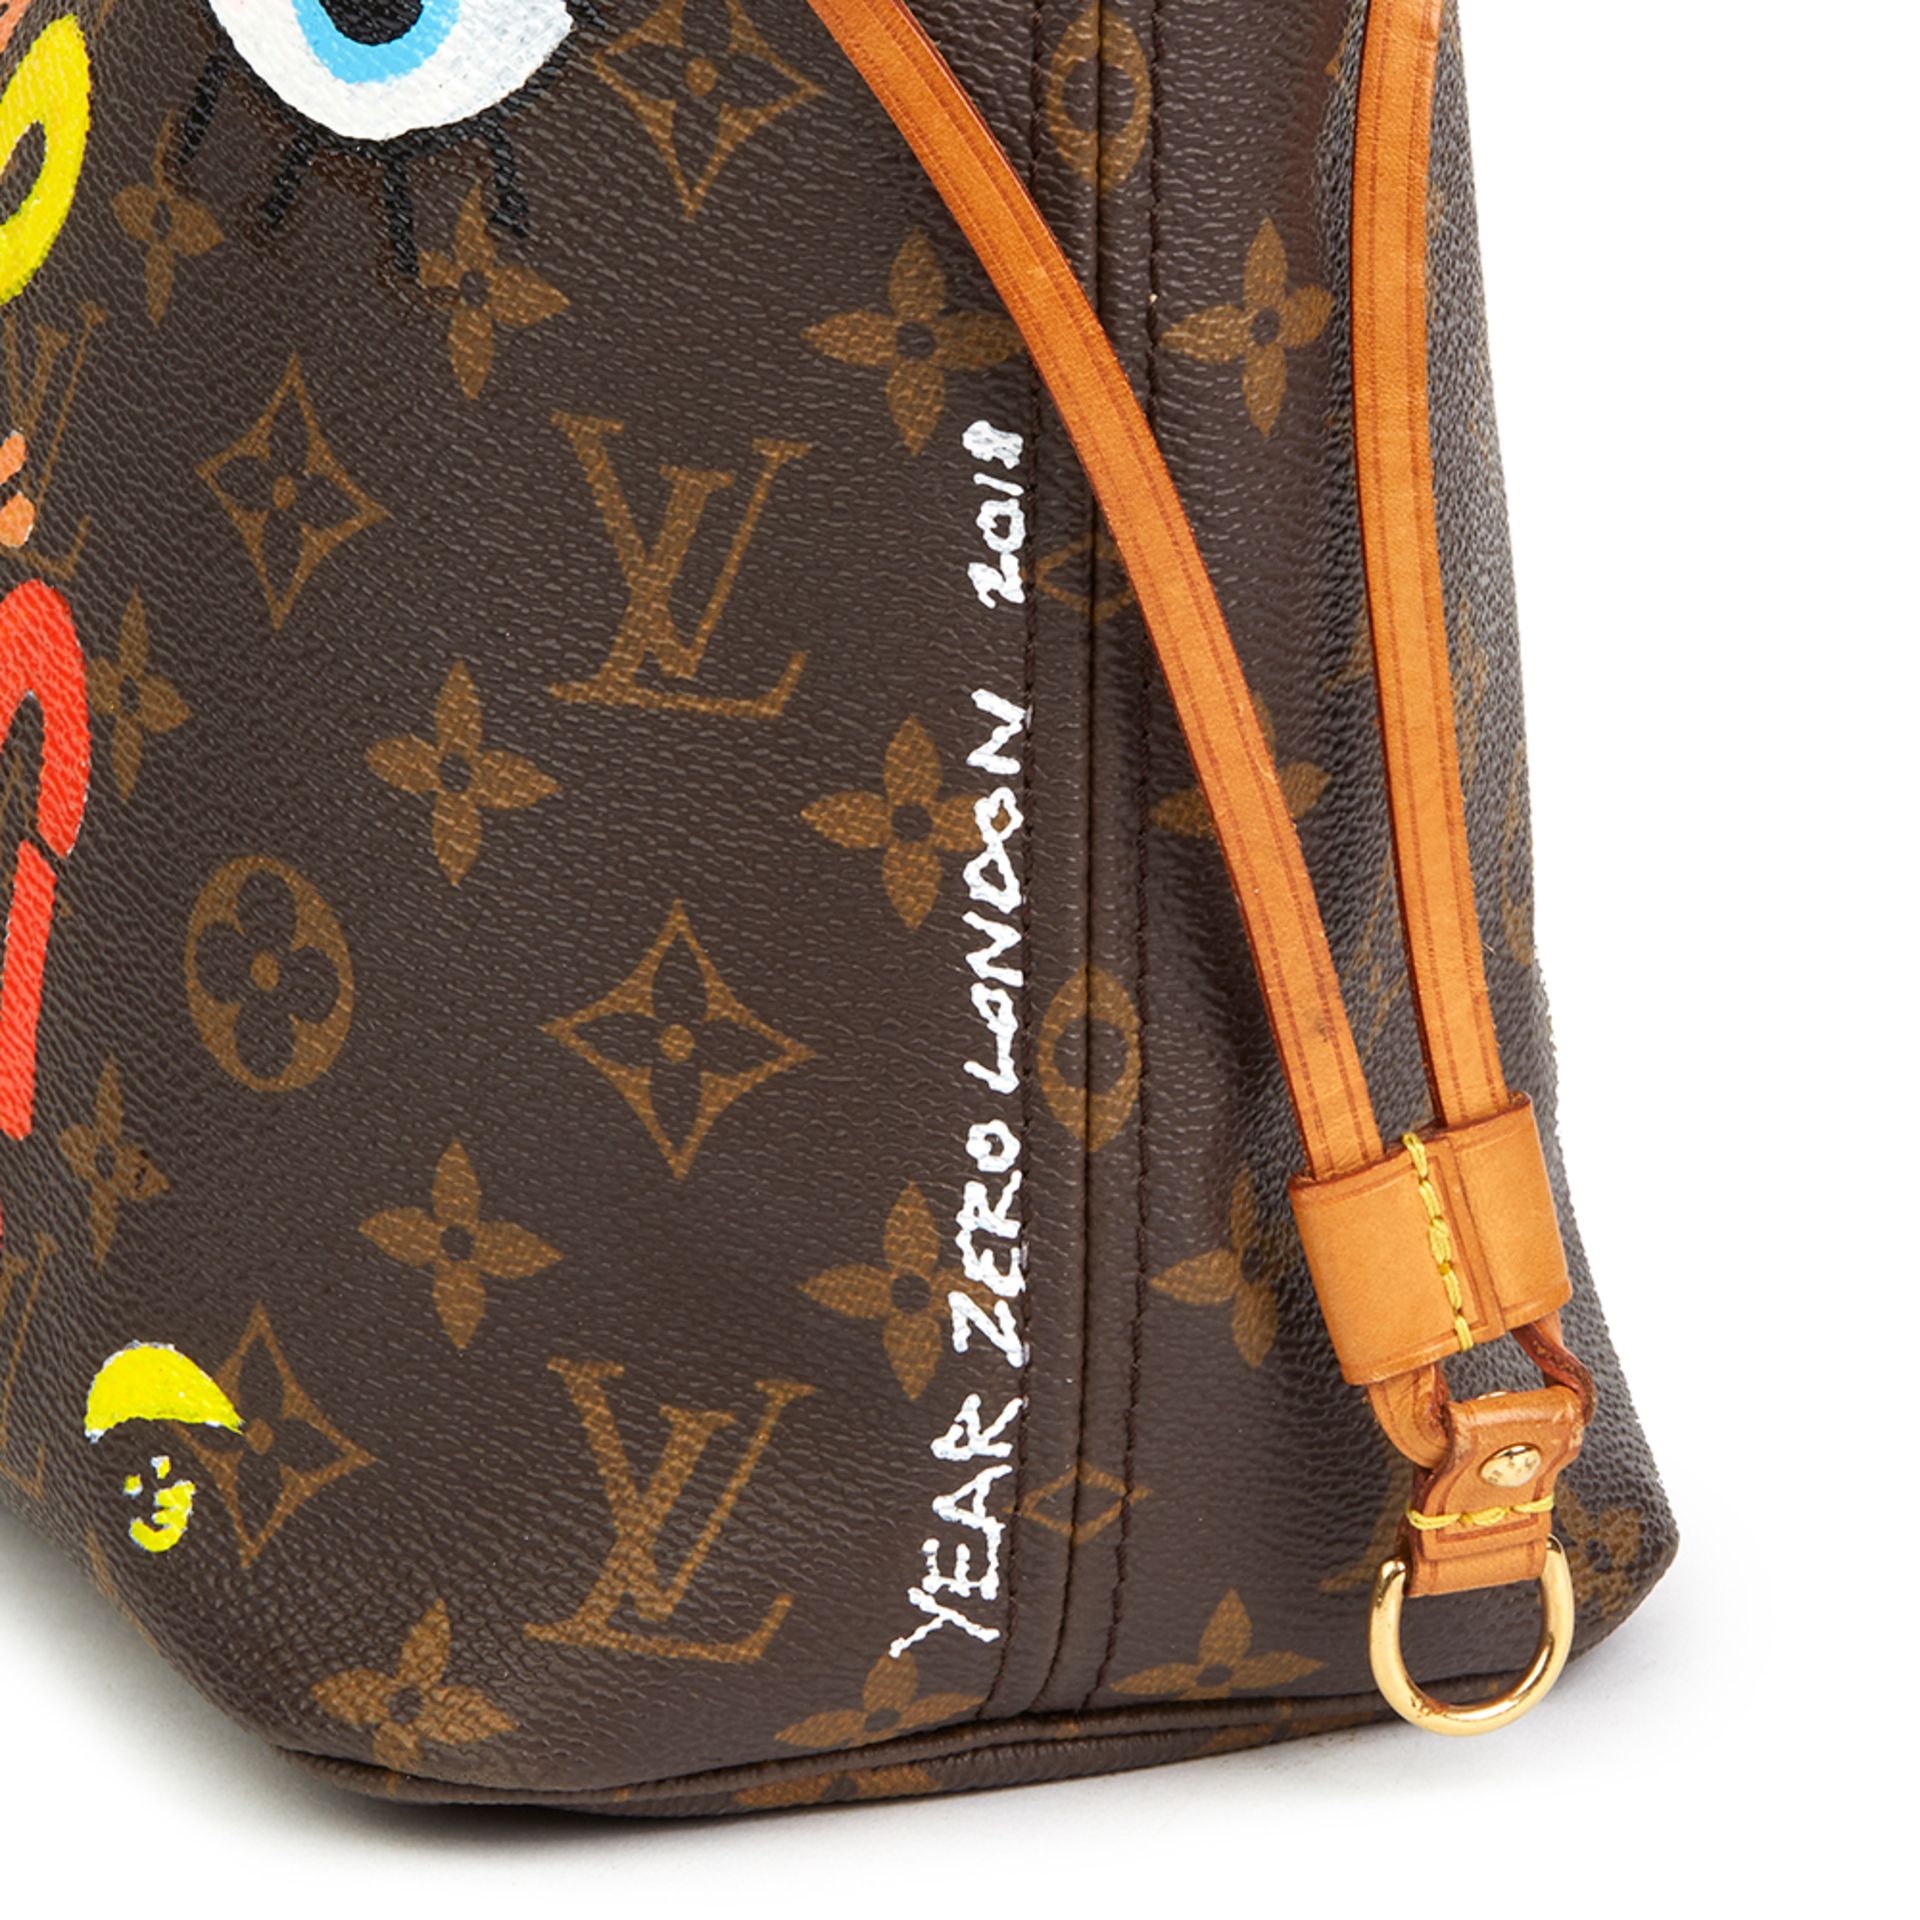 Louis Vuitton X Year Zero London Hand-Painted  ‘Hey Good Lookin’ Brown Monogram Coated Canvas Never - Image 6 of 11